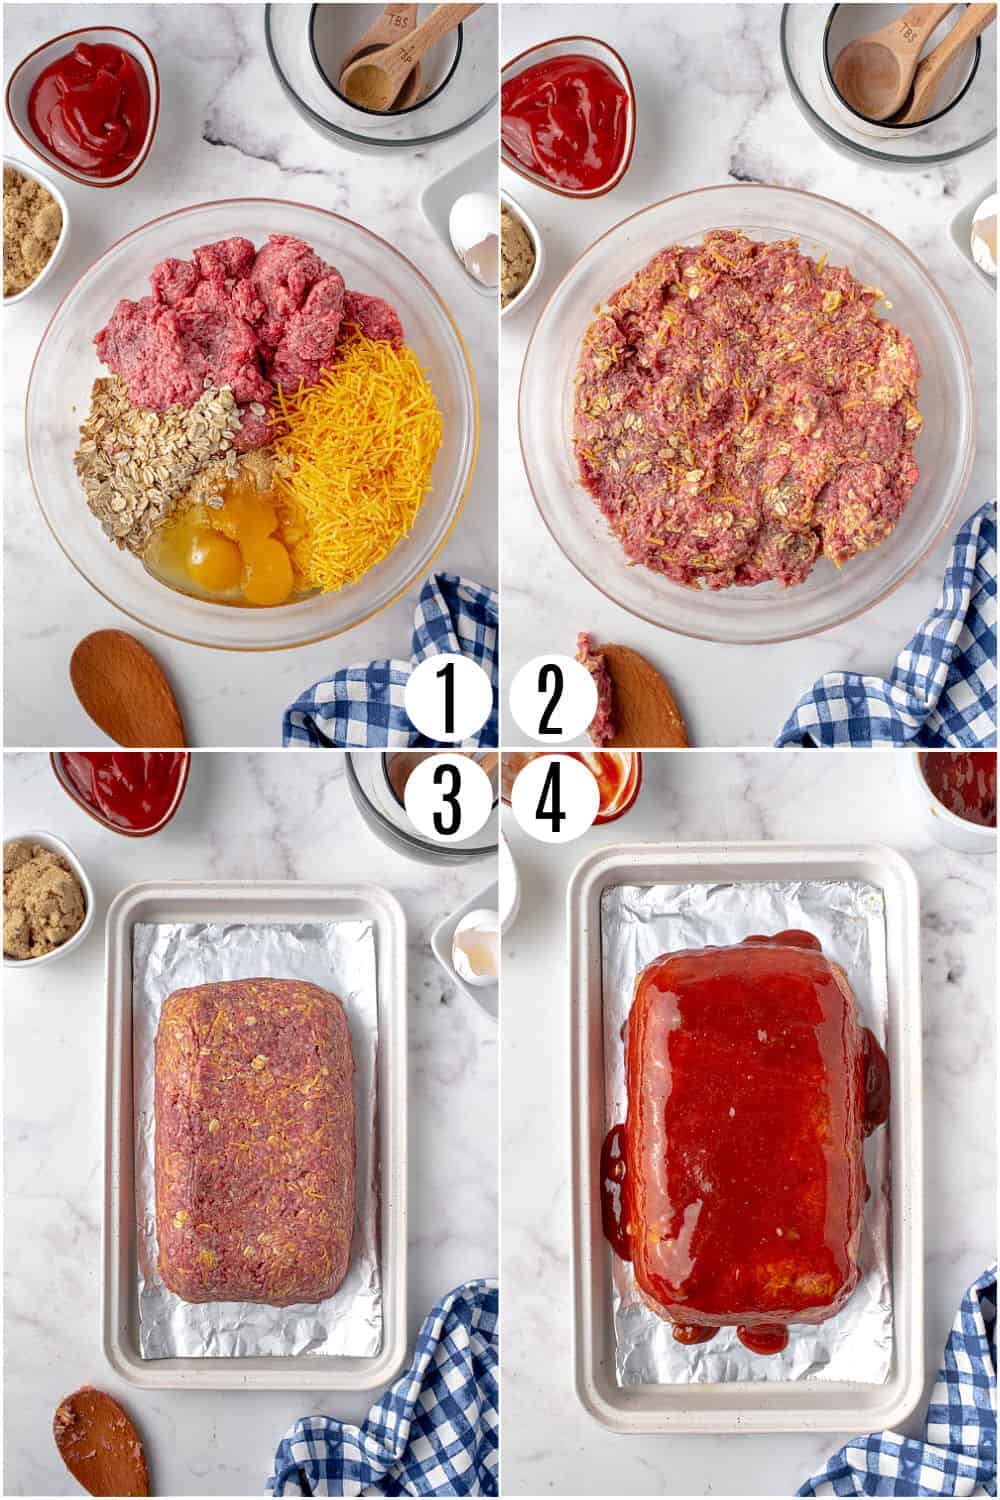 Step by step photos showing how to make meatloaf.